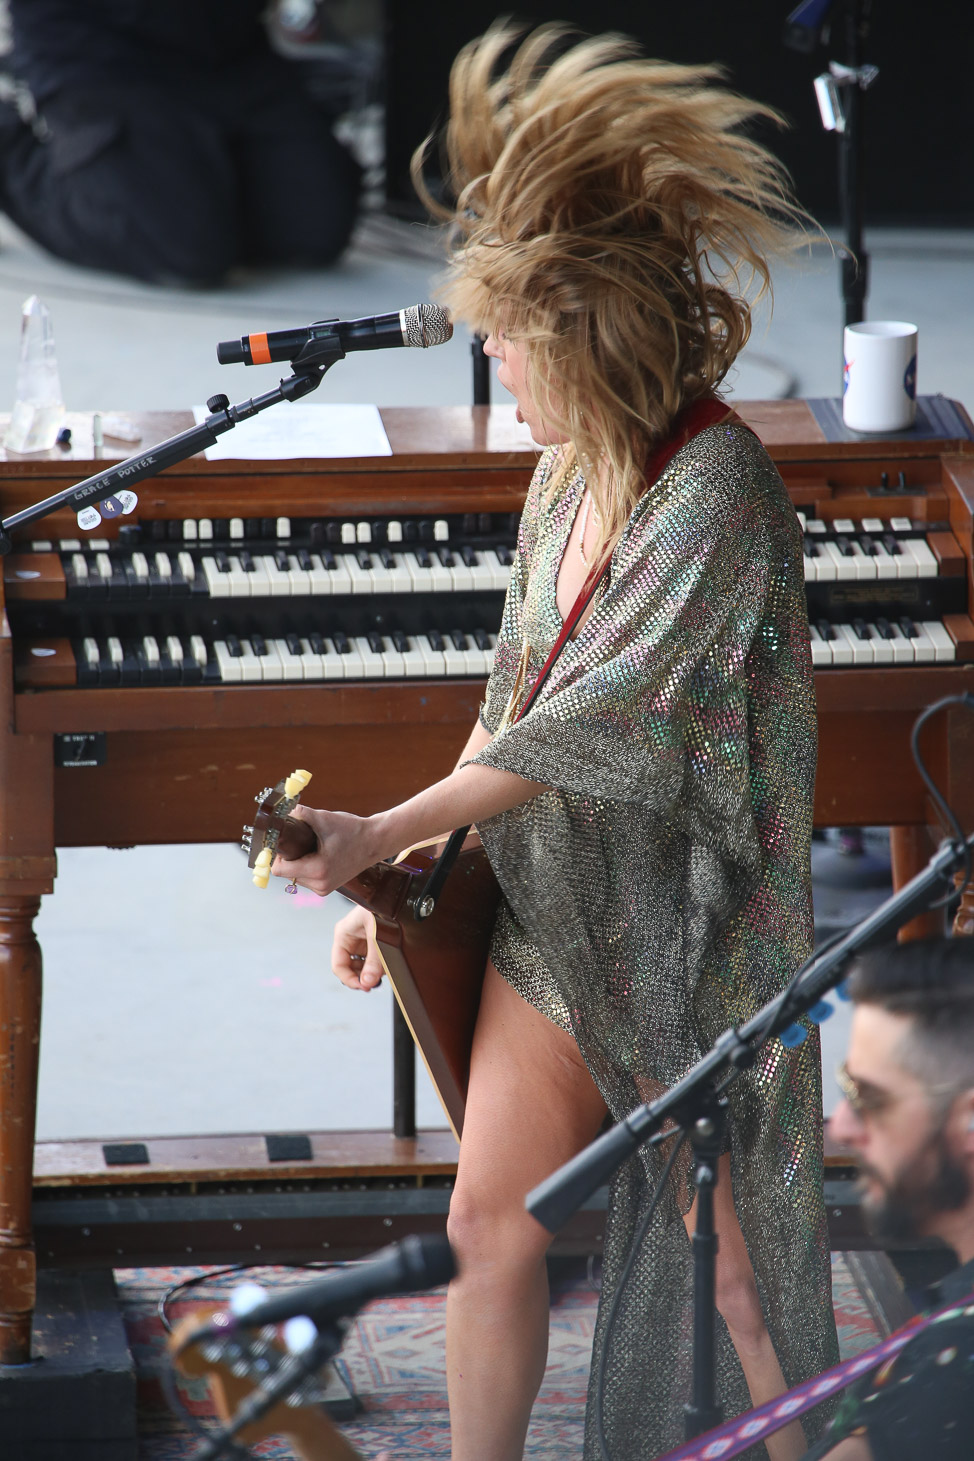 Bonnaroo 2016: The Good, The Bad, The Awesome | Grace Potter